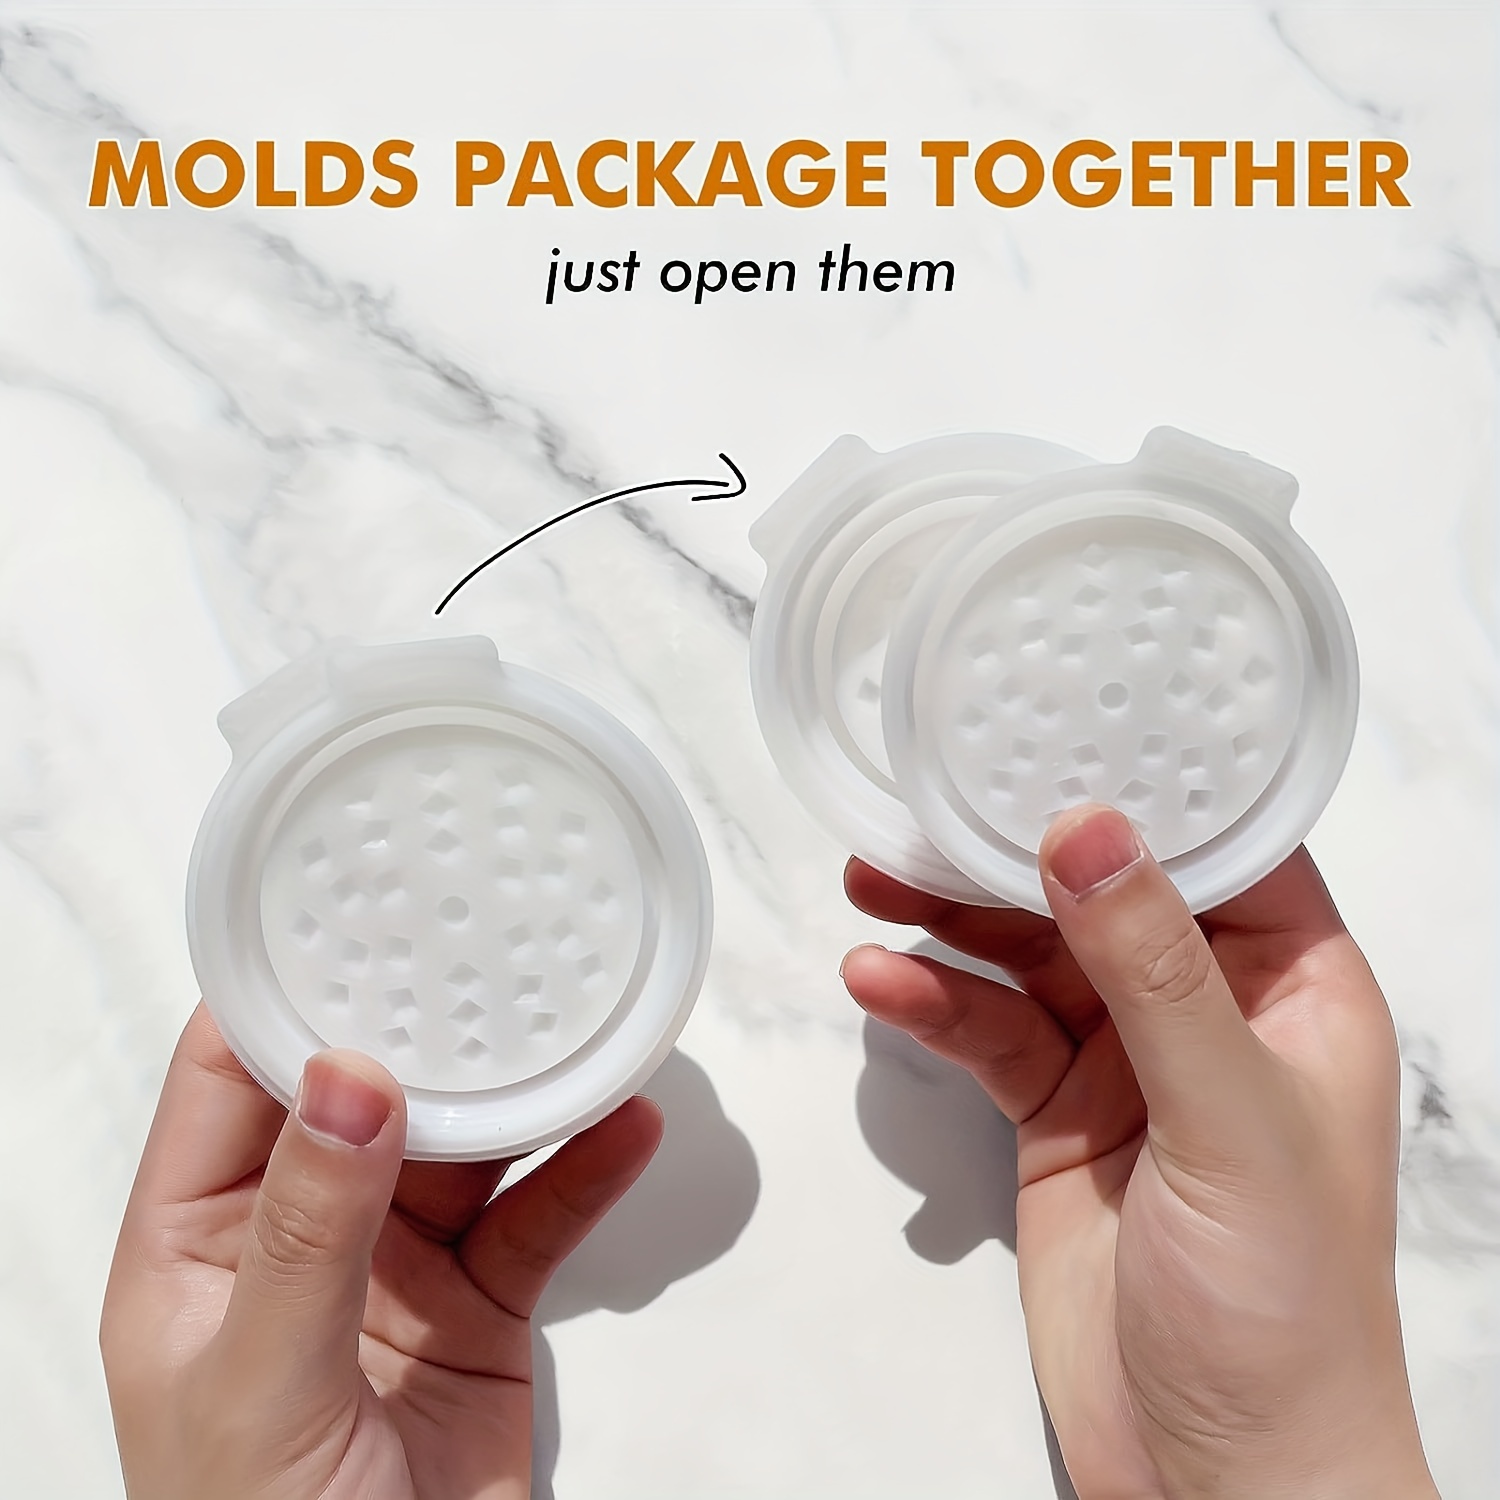 5 PCS Resin Tray Molds and Resin Grinder Mold for Grind and Storage, Large  Resin Molds Silicone Molds for Resin, DIY Resin Epoxy Kit